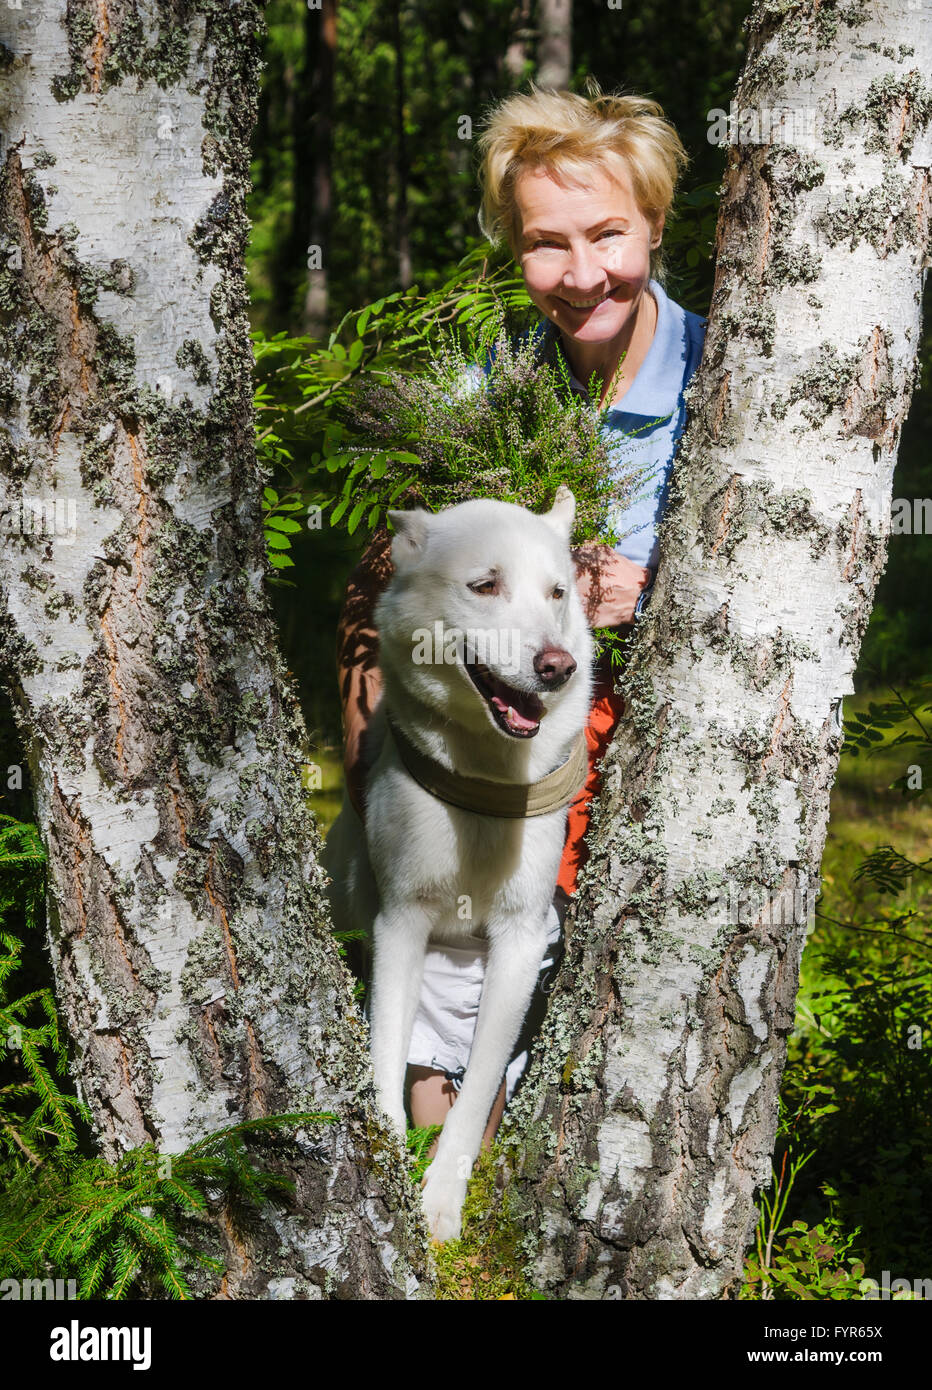 Portrait of a woman with a dog on a walk in the woods Stock Photo